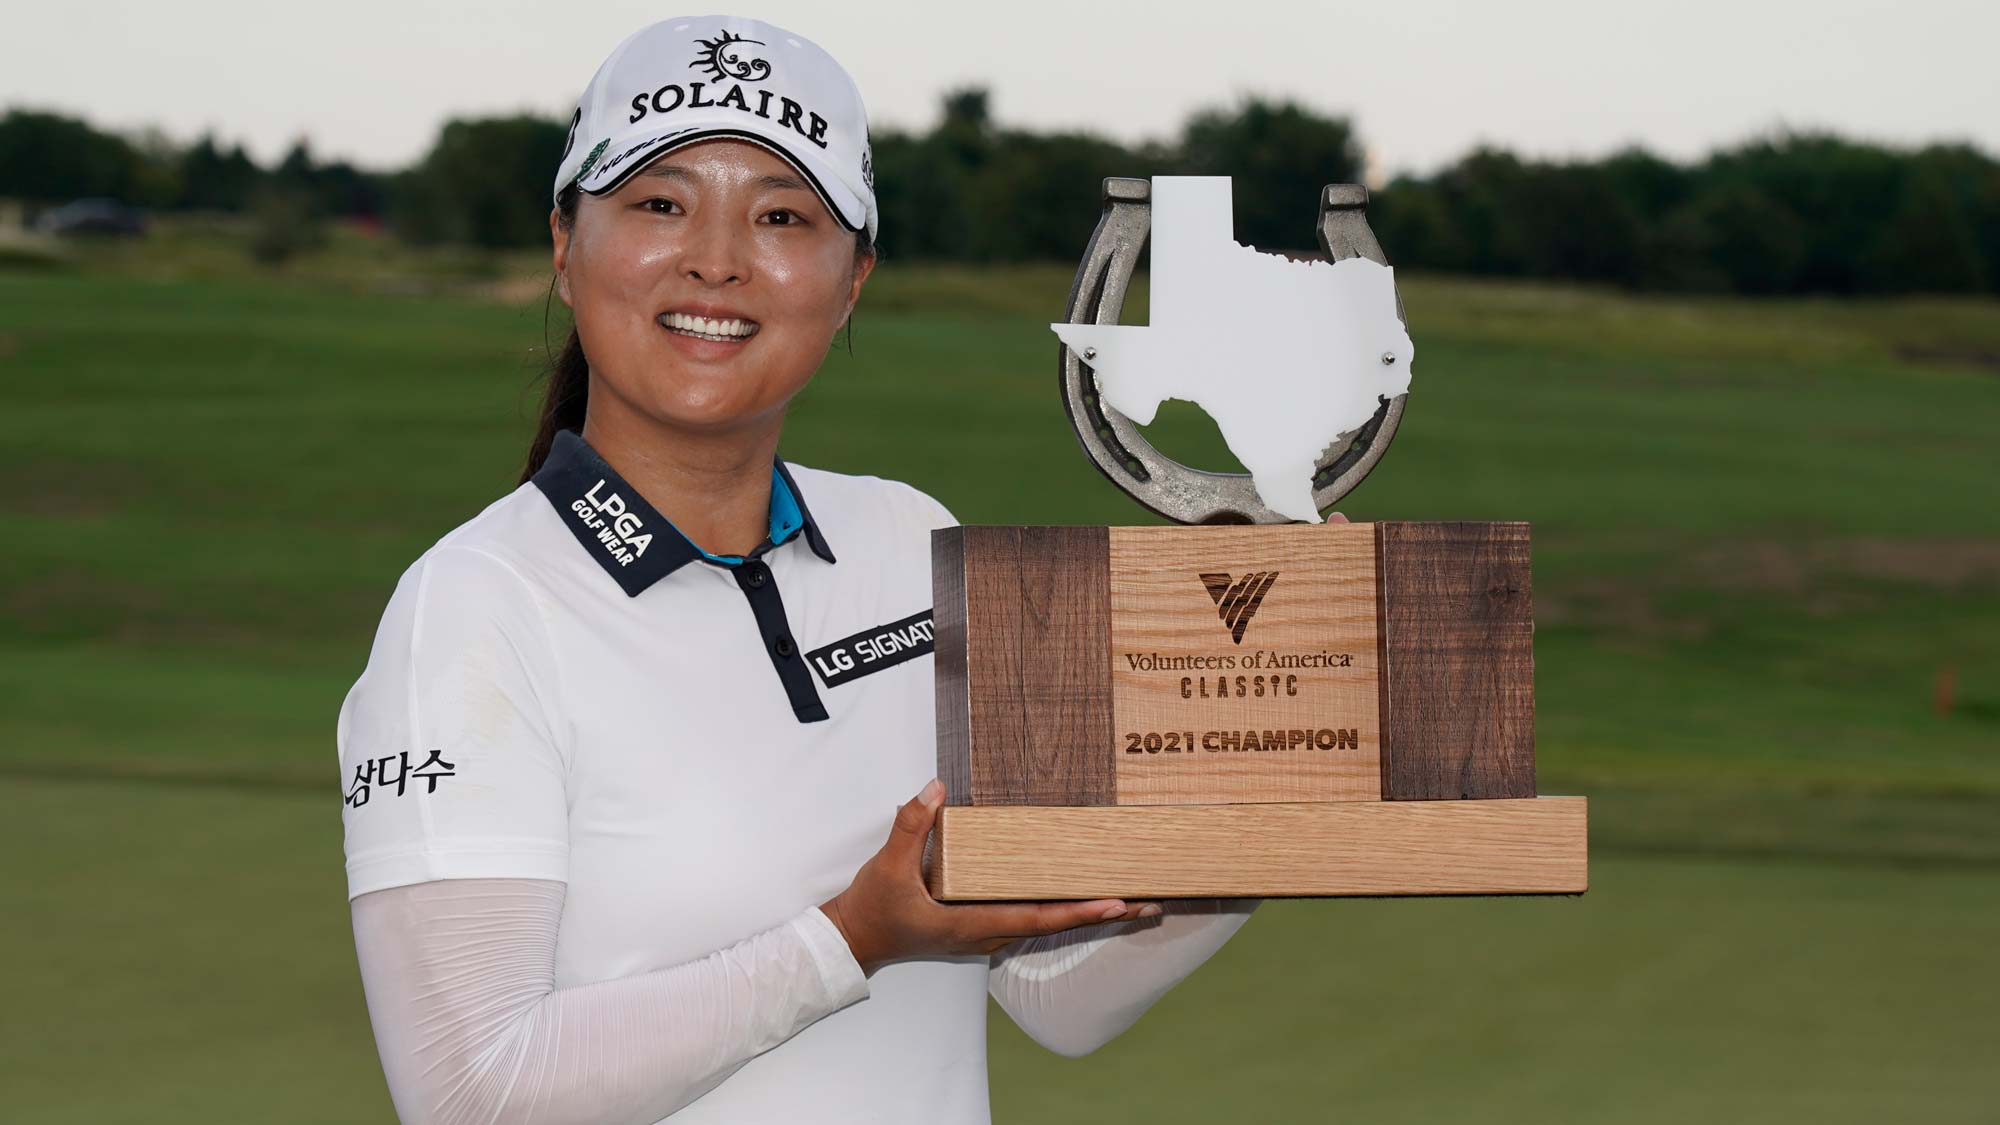 Jin Young Ko of Korea poses with the trophy after winning the Volunteers of America Classic